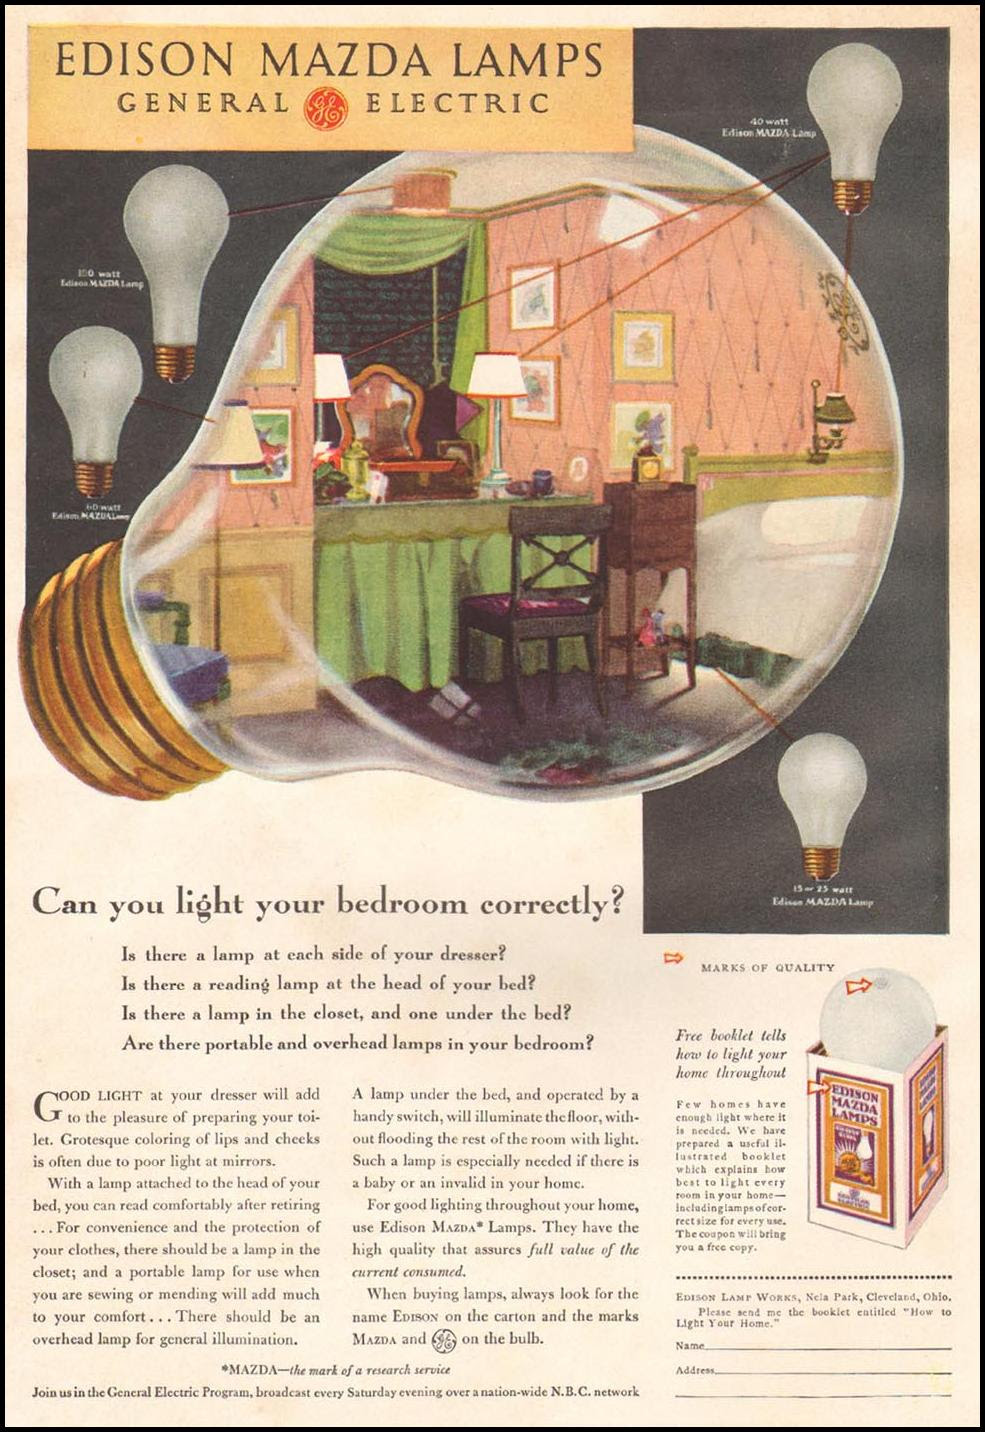 EDISON MAZDA LAMPS
BETTER HOMES AND GARDENS
04/01/1931
INSIDE FRONT